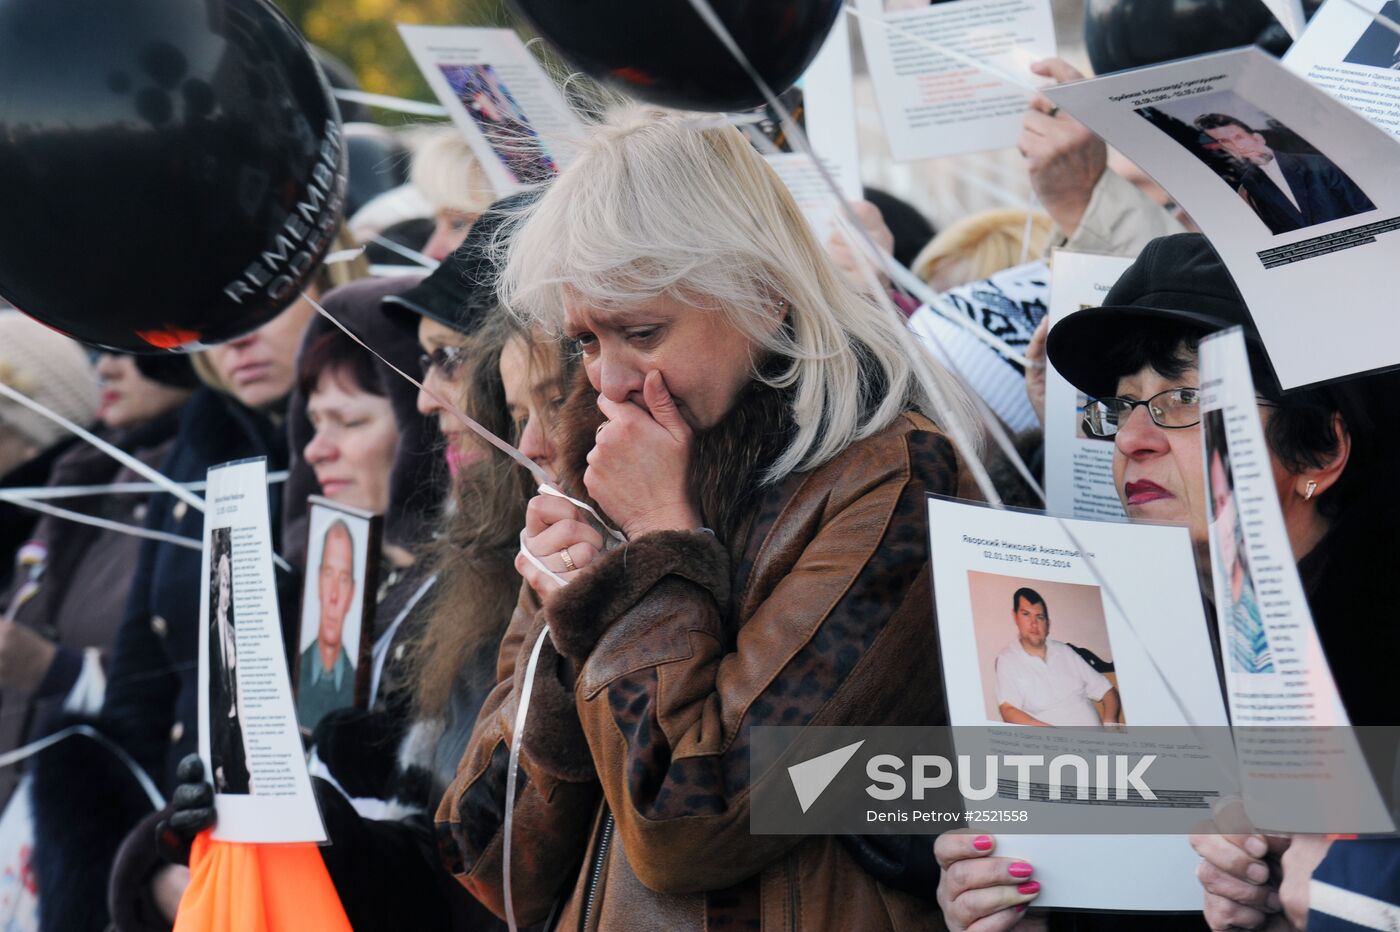 Mourning activities by Odessa's Trade Union House